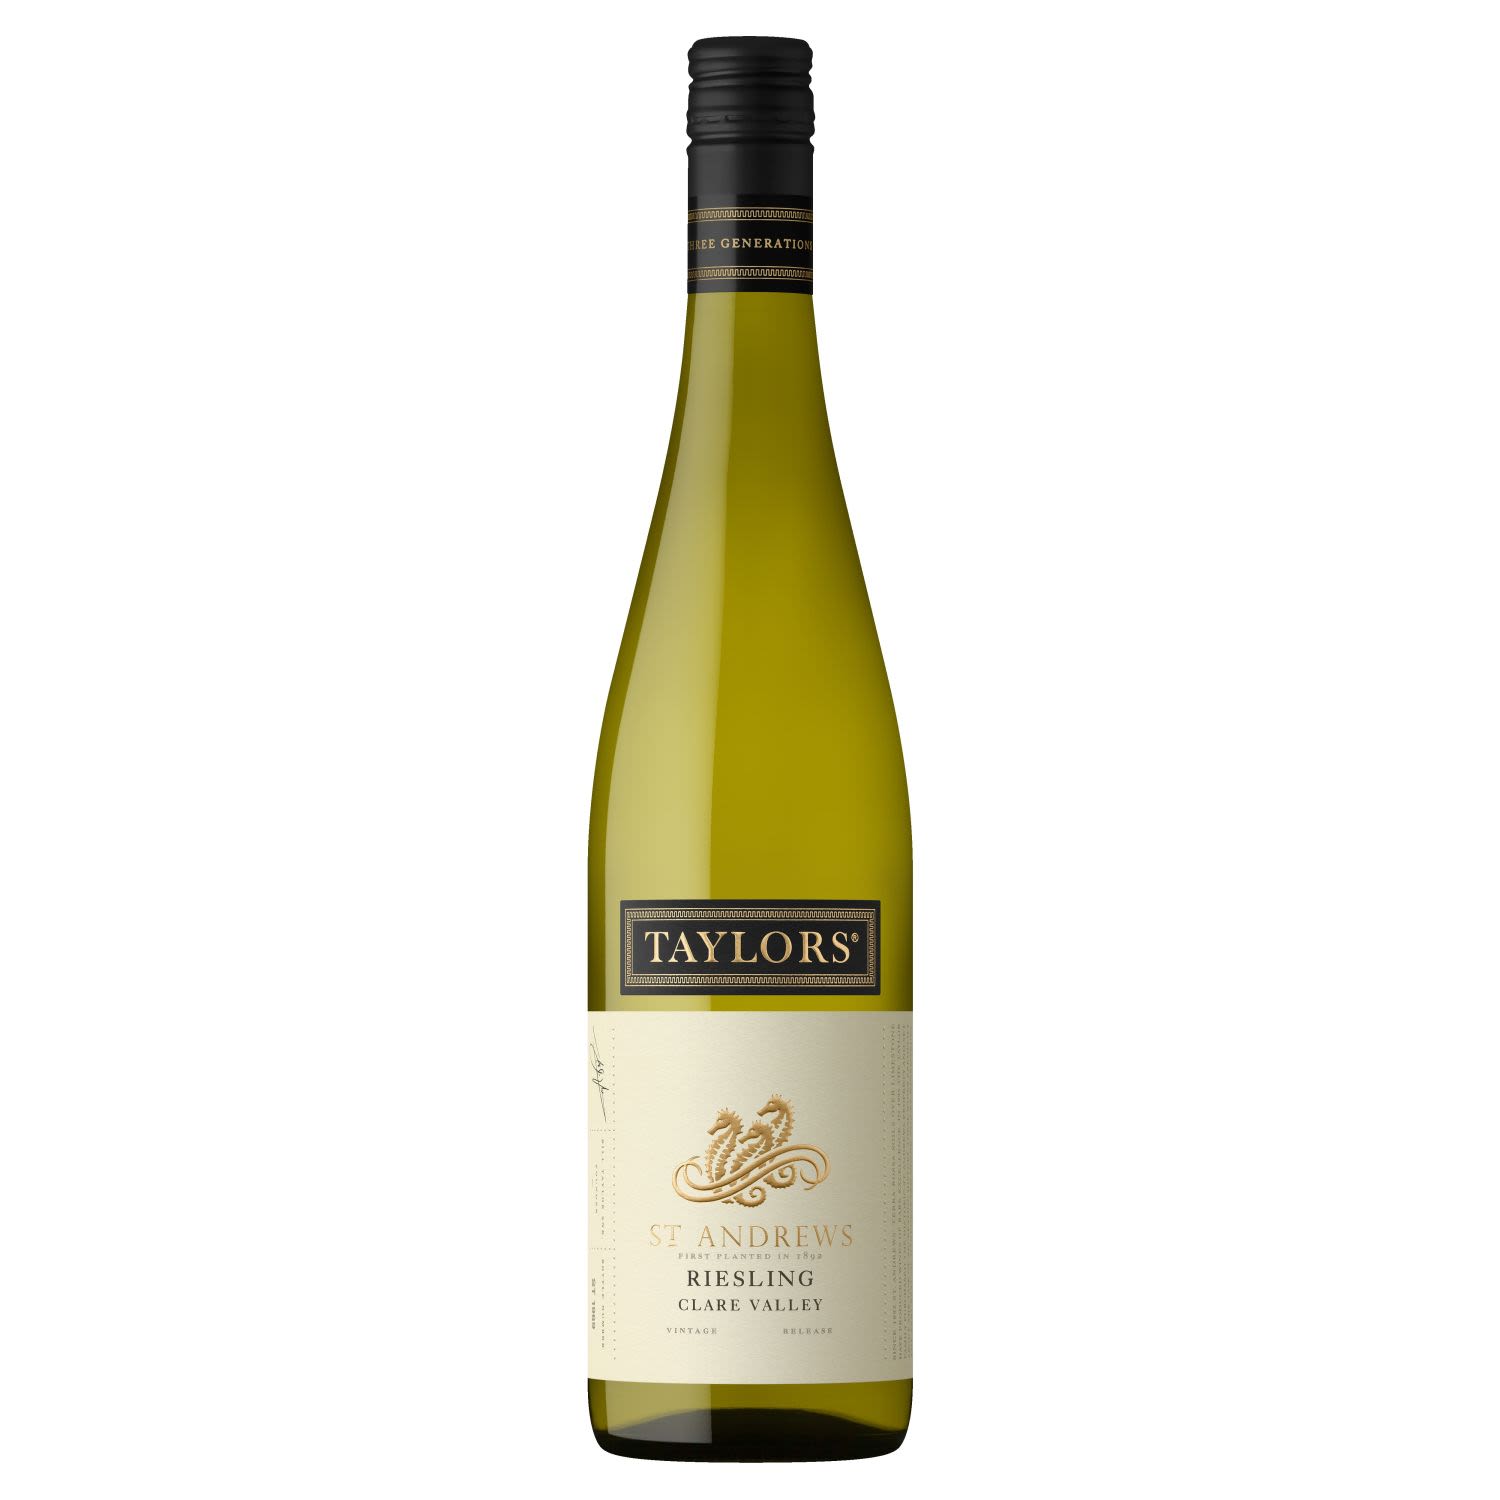 Taylors St Andrews Riesling 750mL 6 Pack